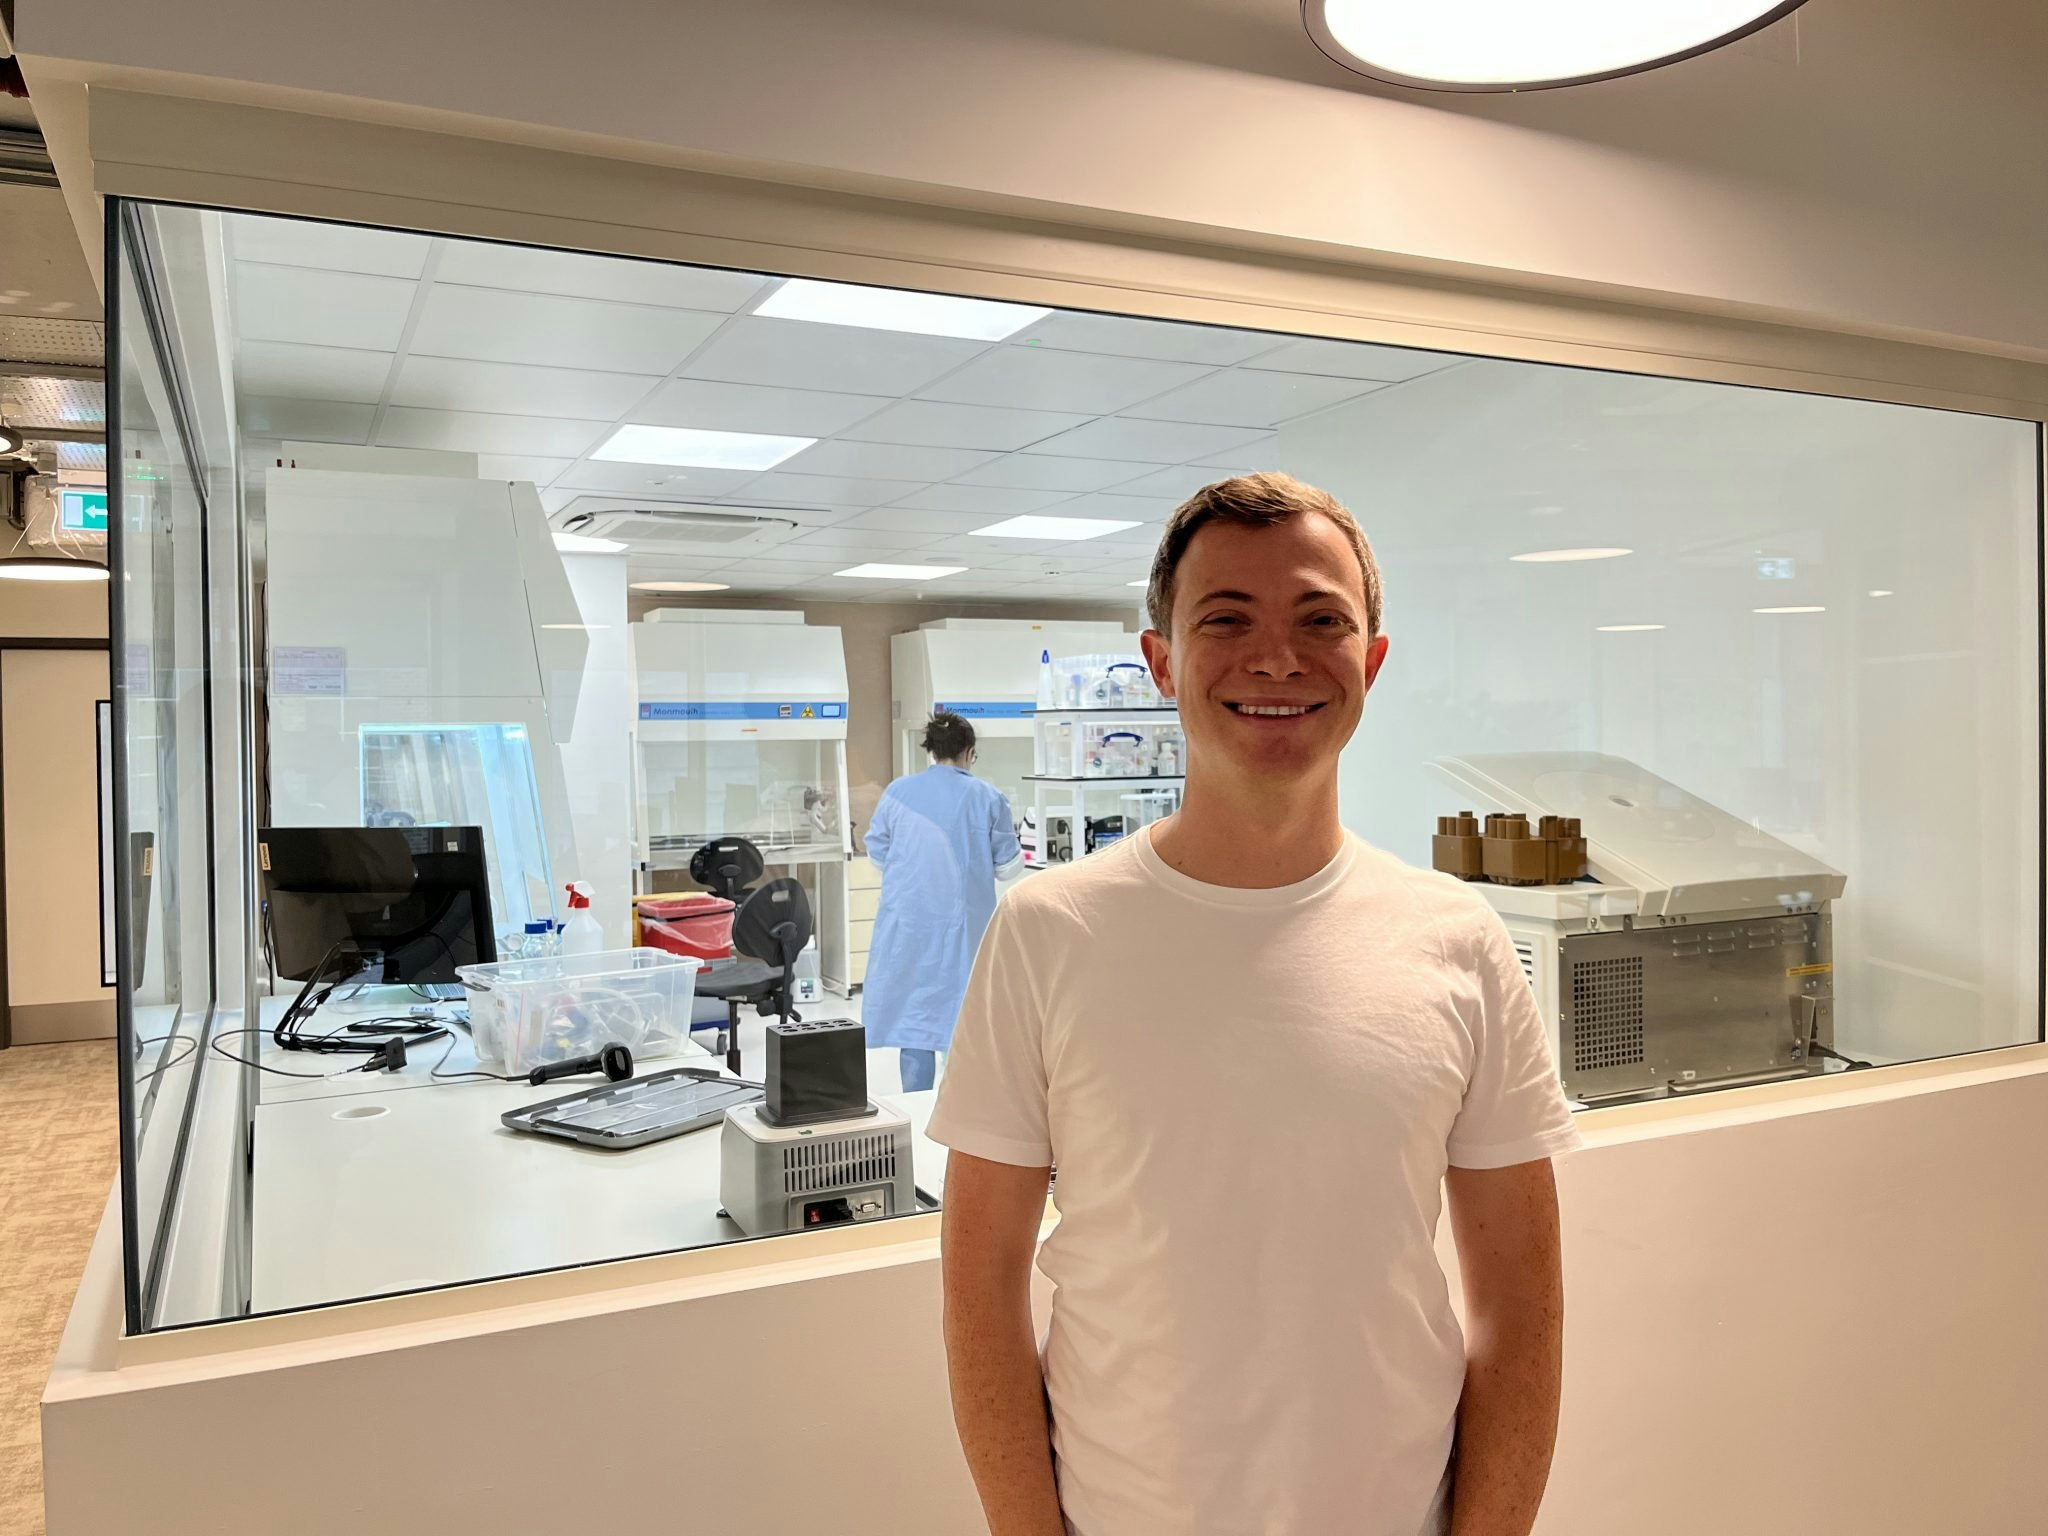 Hoxton Farms' cofounder Max Jamilly in front of the tissue culture lab